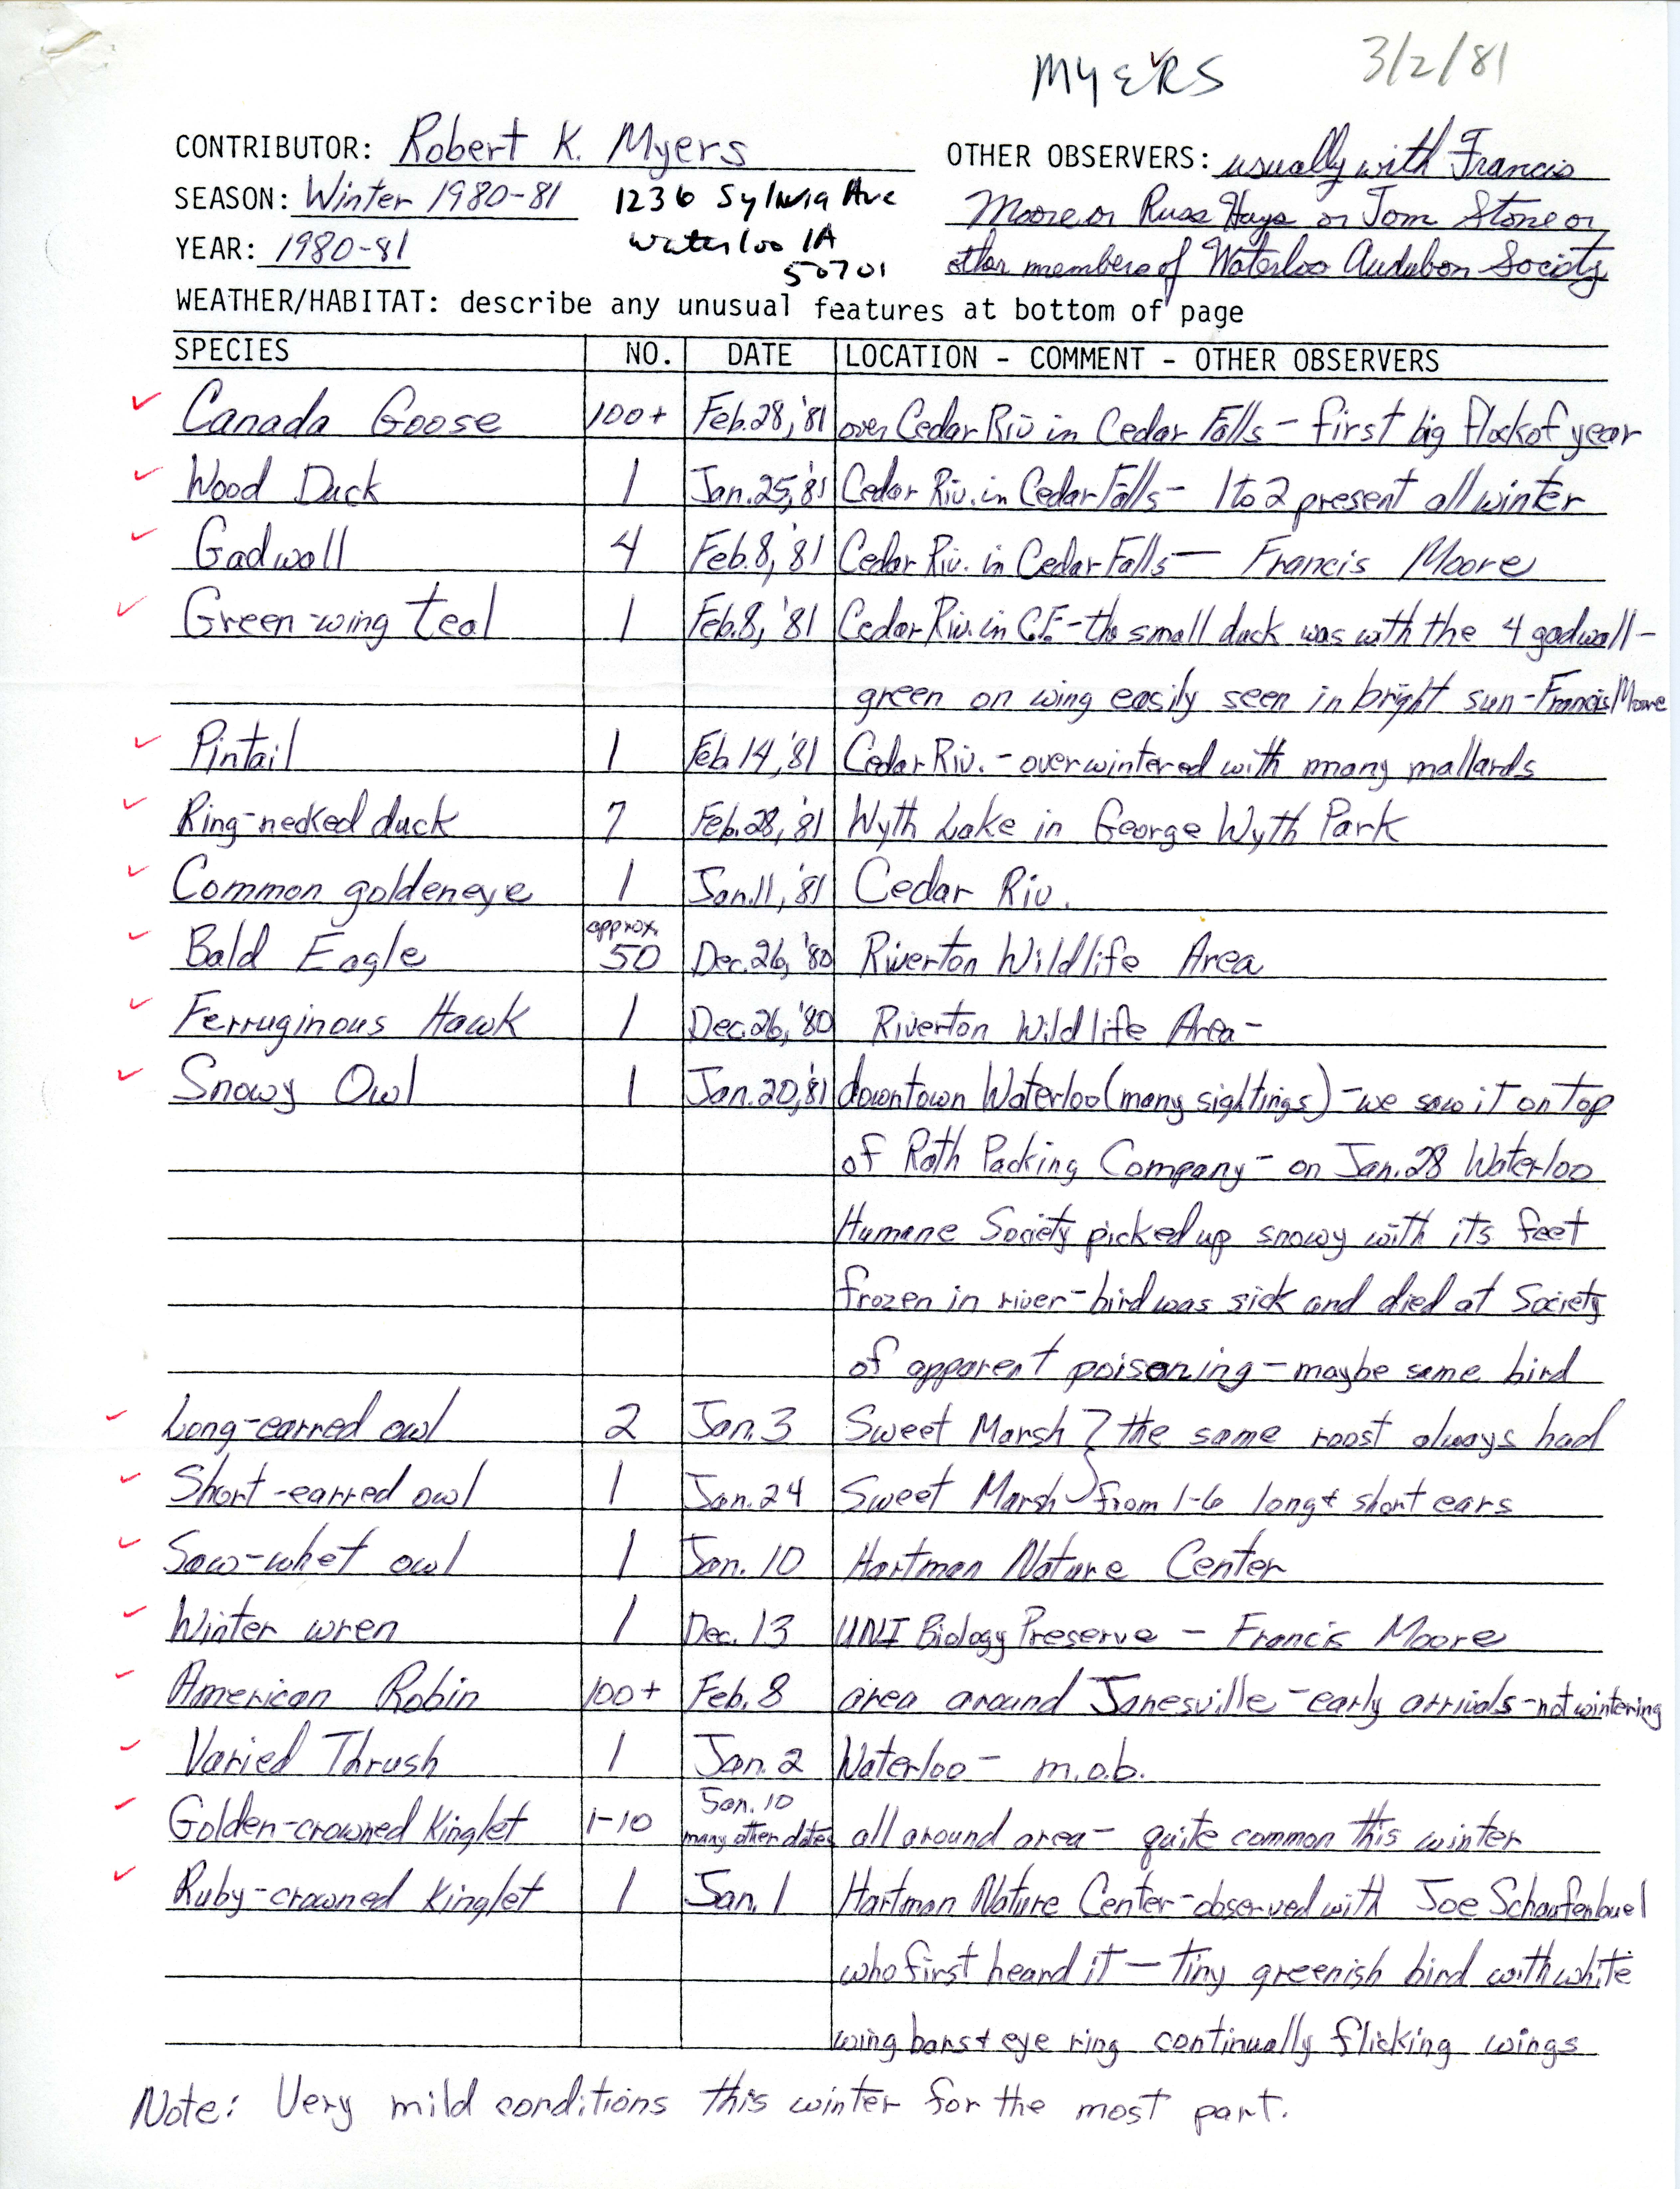 Annotated bird sighting list for winter 1980-1981 compiled by Robert K. Myers